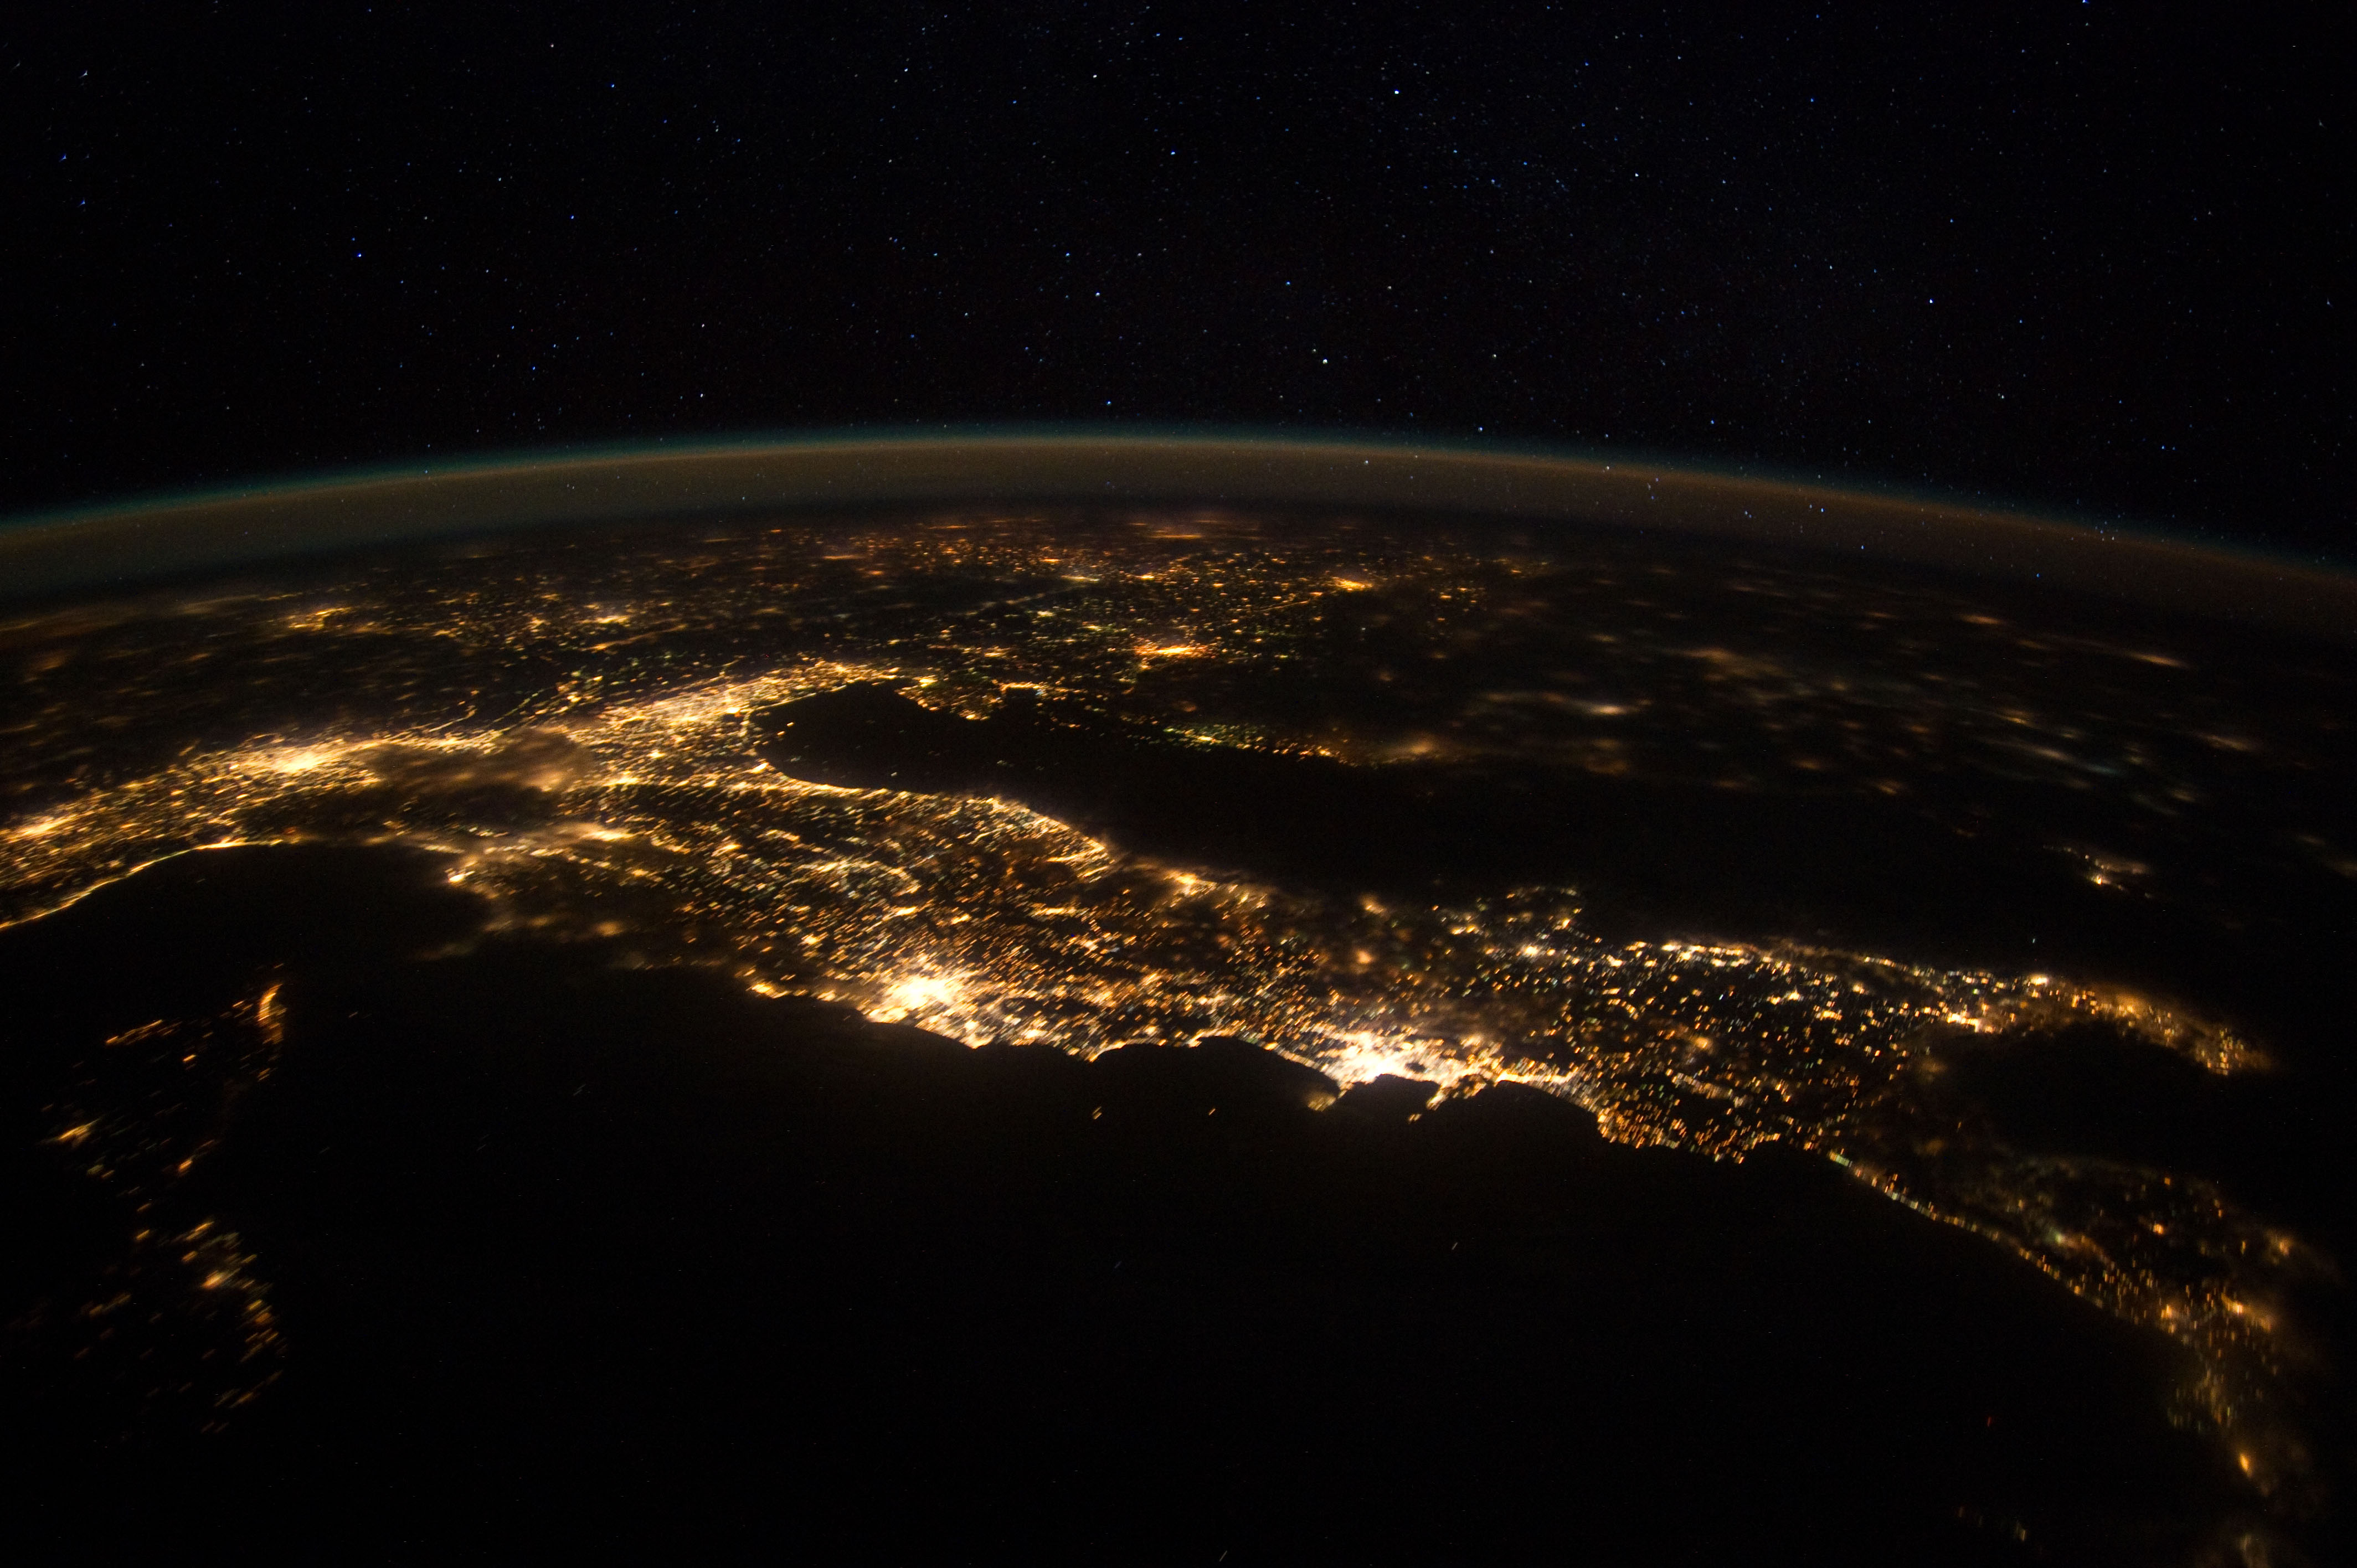 Italy from space reveals a huge amount of light pollution